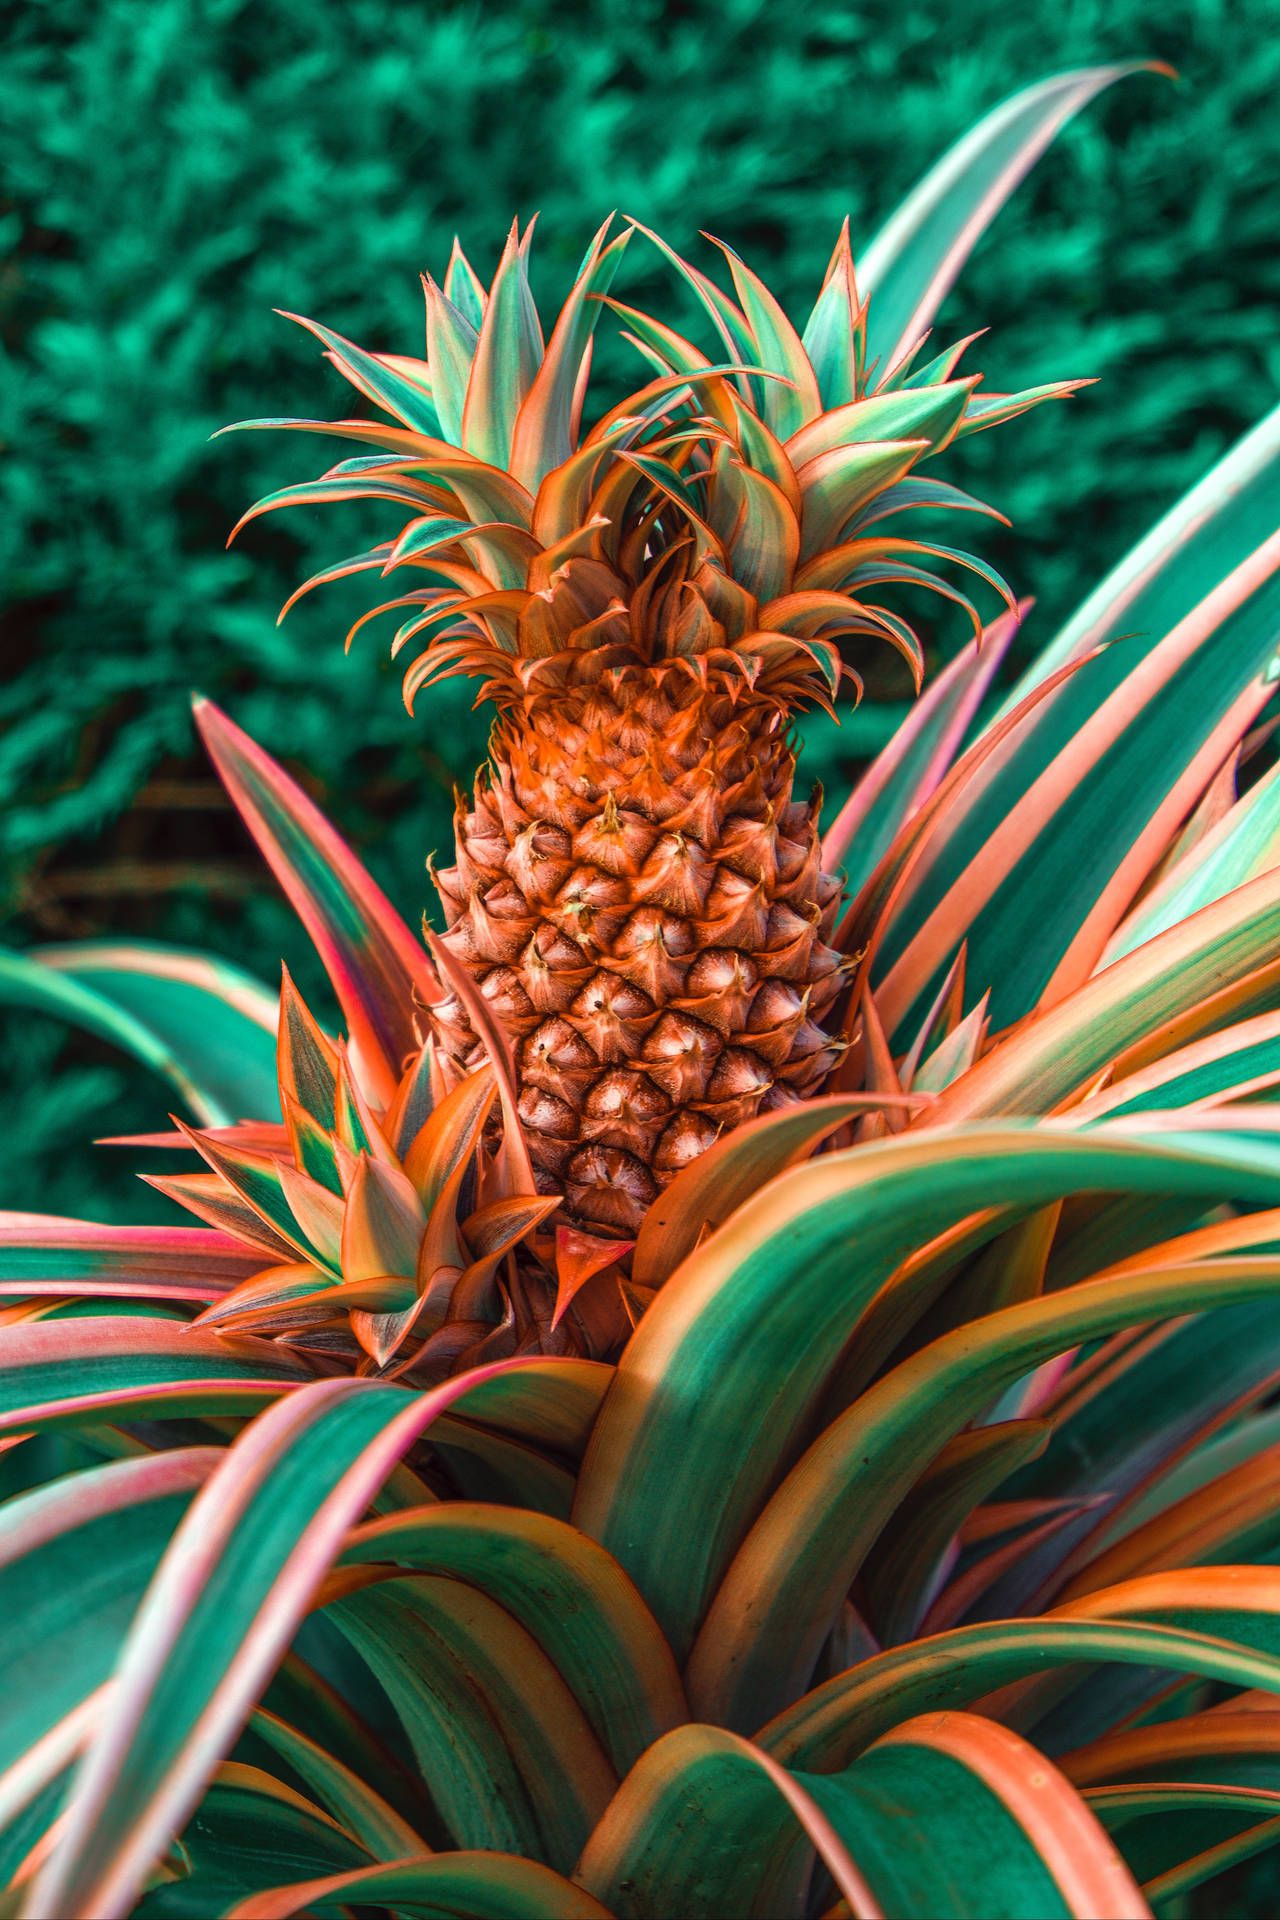 Pineapple HD Wallpaper, Free Pineapple Wallpaper Image For All Devices